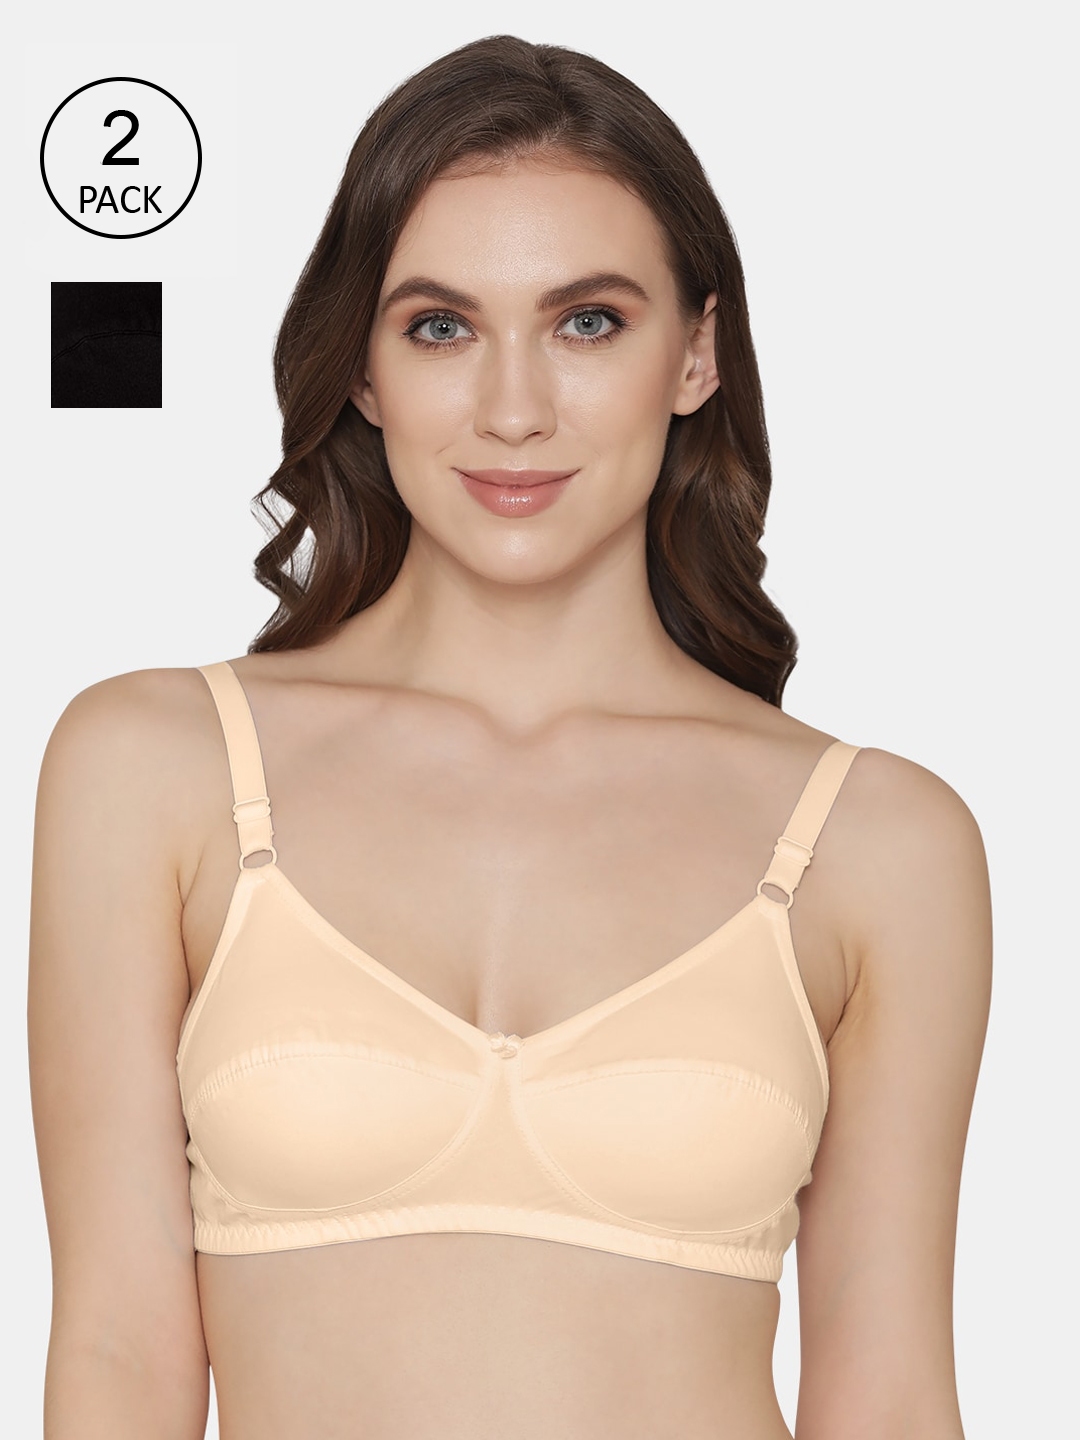 Buy Her-Class Full Coverage Cotton Bra in (B,C,D Cup) for  Teenager/Girls/Women Non-Wired Non-Padded 30B (Combo of 3) White at